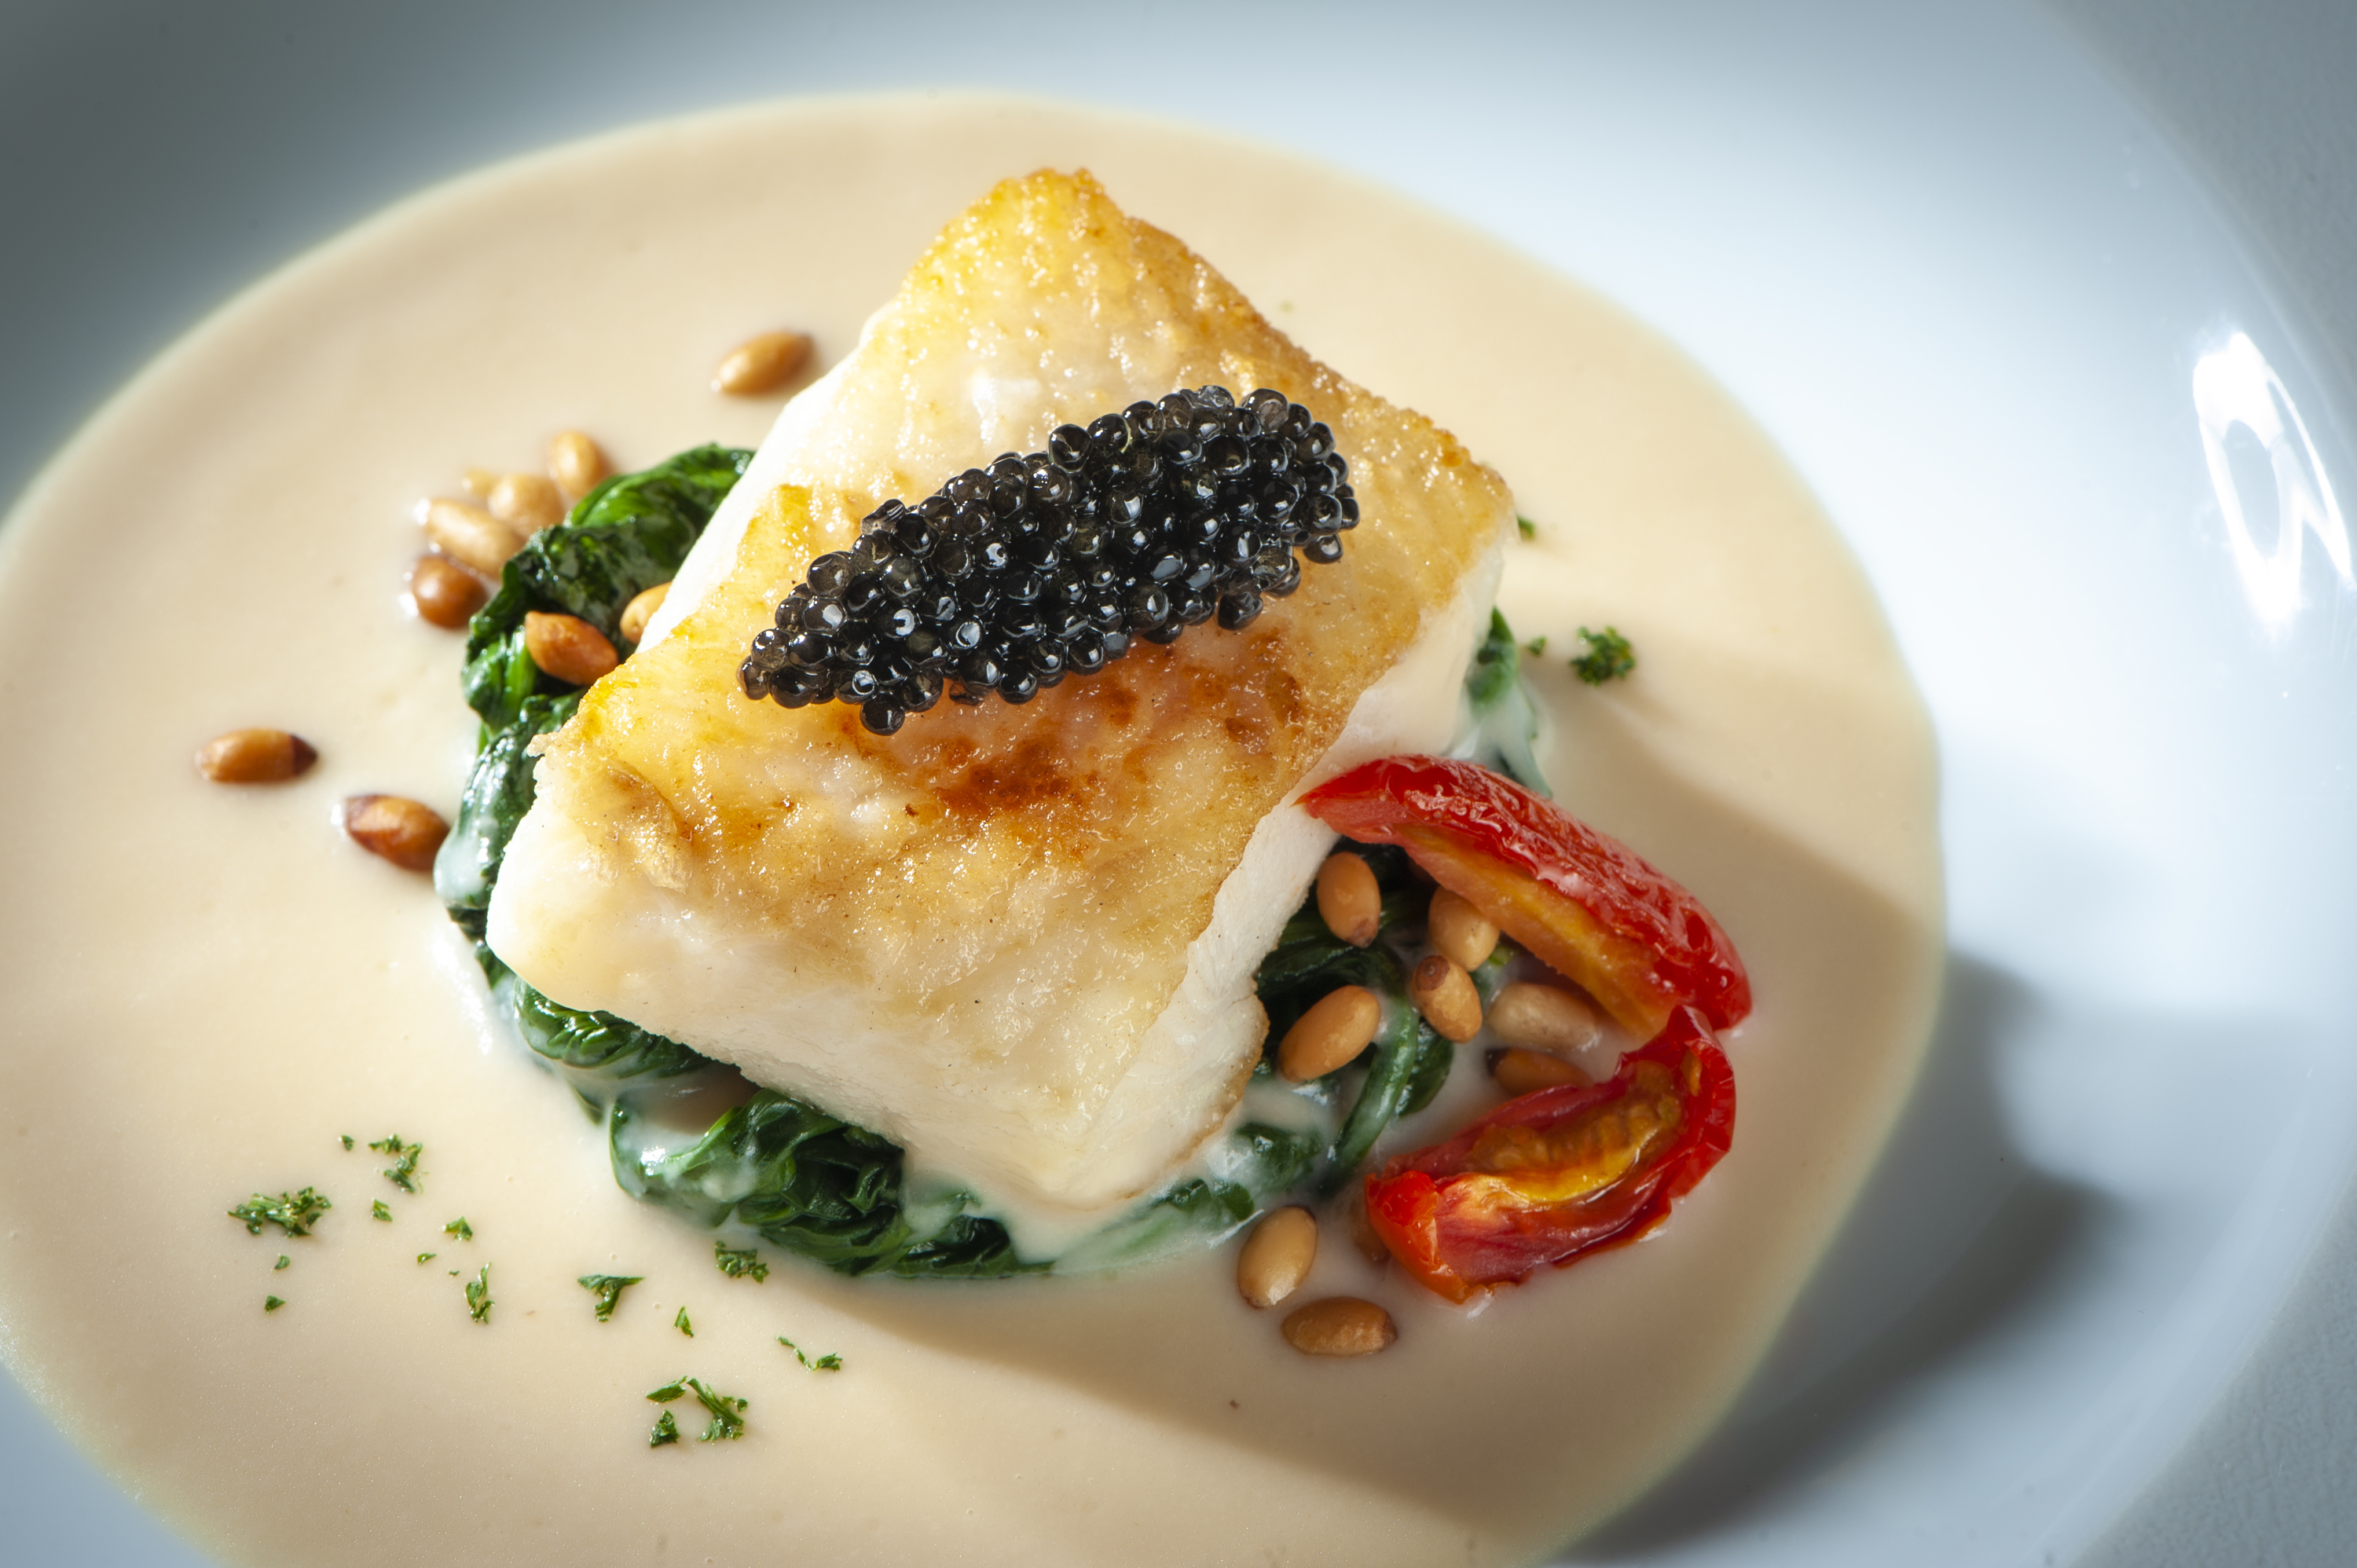 where to Celebrate new year's eve macau 2021 Slow cooked black cod fish with caviar and spinach New Years Eve Dinner Hotel Lisboa